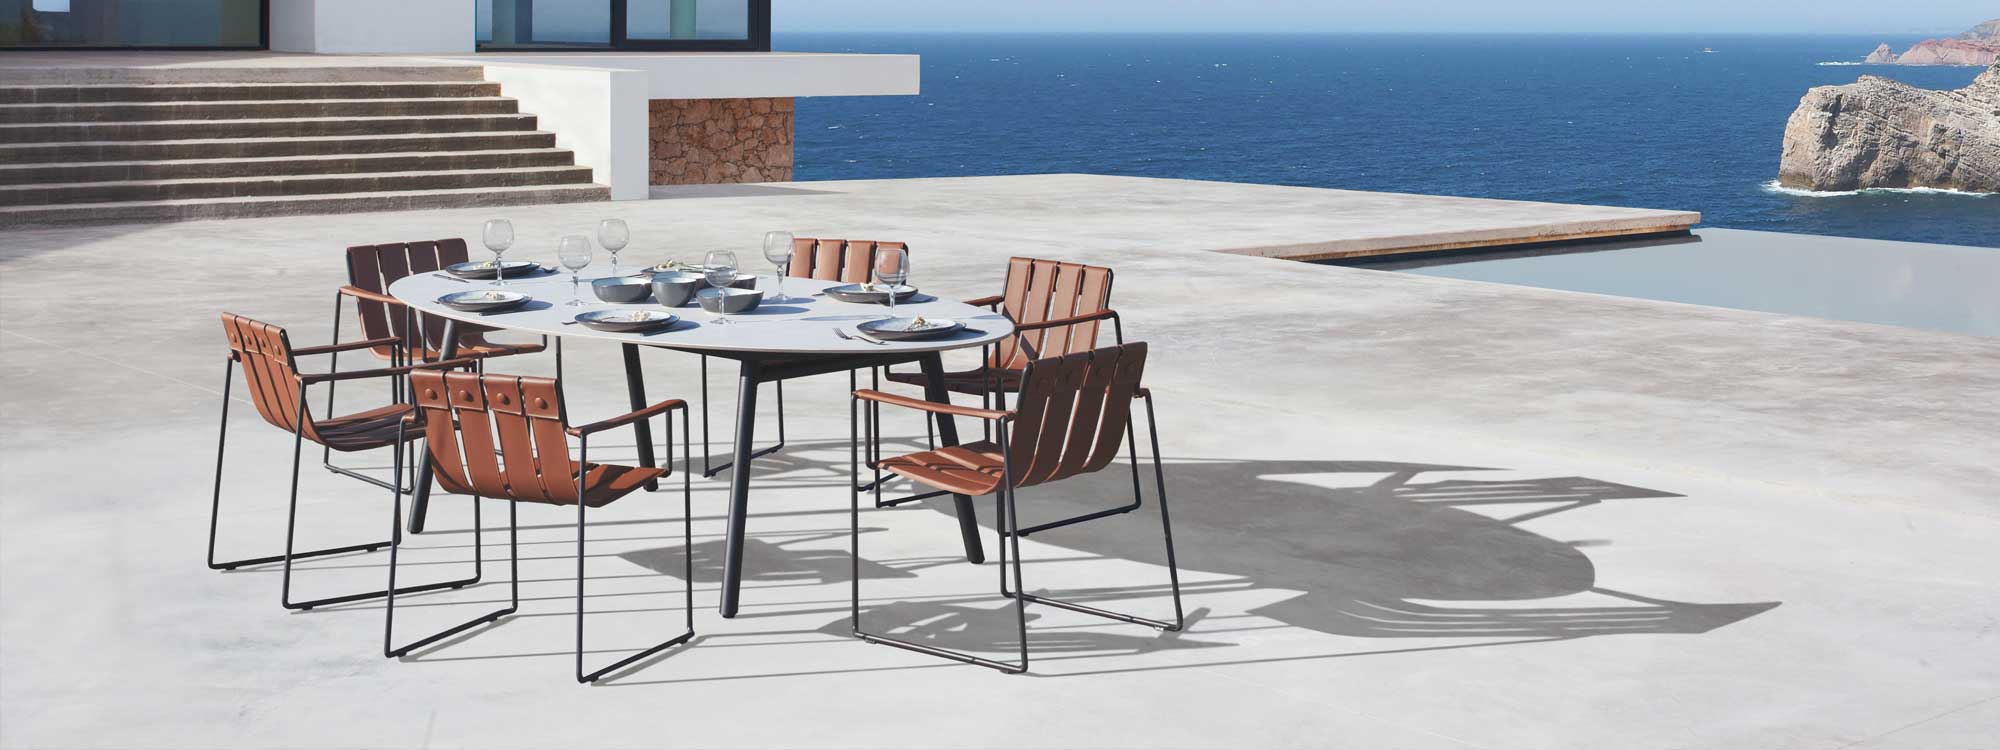 Bace table & Strappy garden dining chair is a modern outdoor carver chair in minimalist outdoor furniture materials by Royal Botania luxury exterior furniture